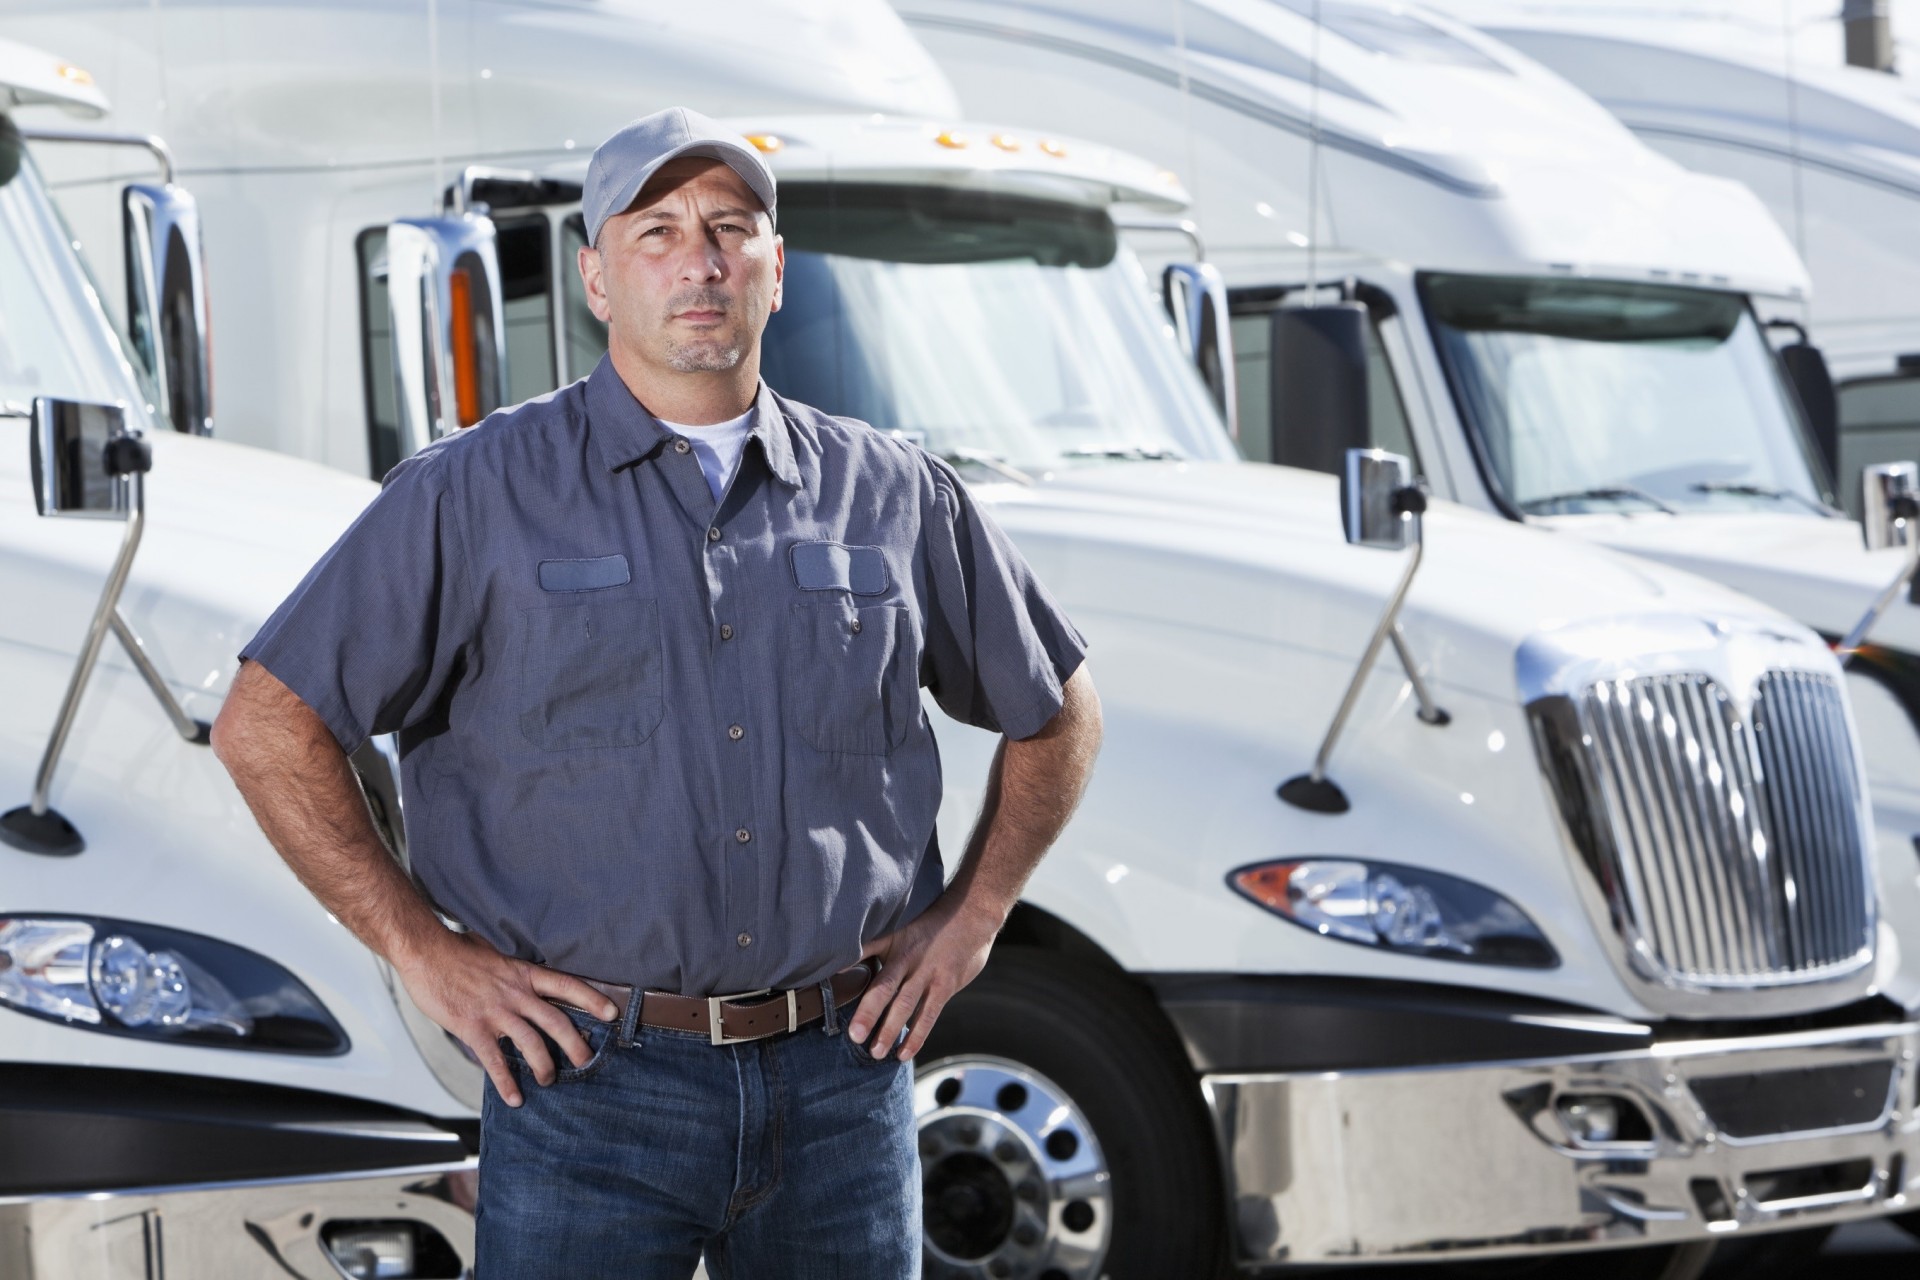 The 10 Commandments of Commercial Truck Insurance pt.1